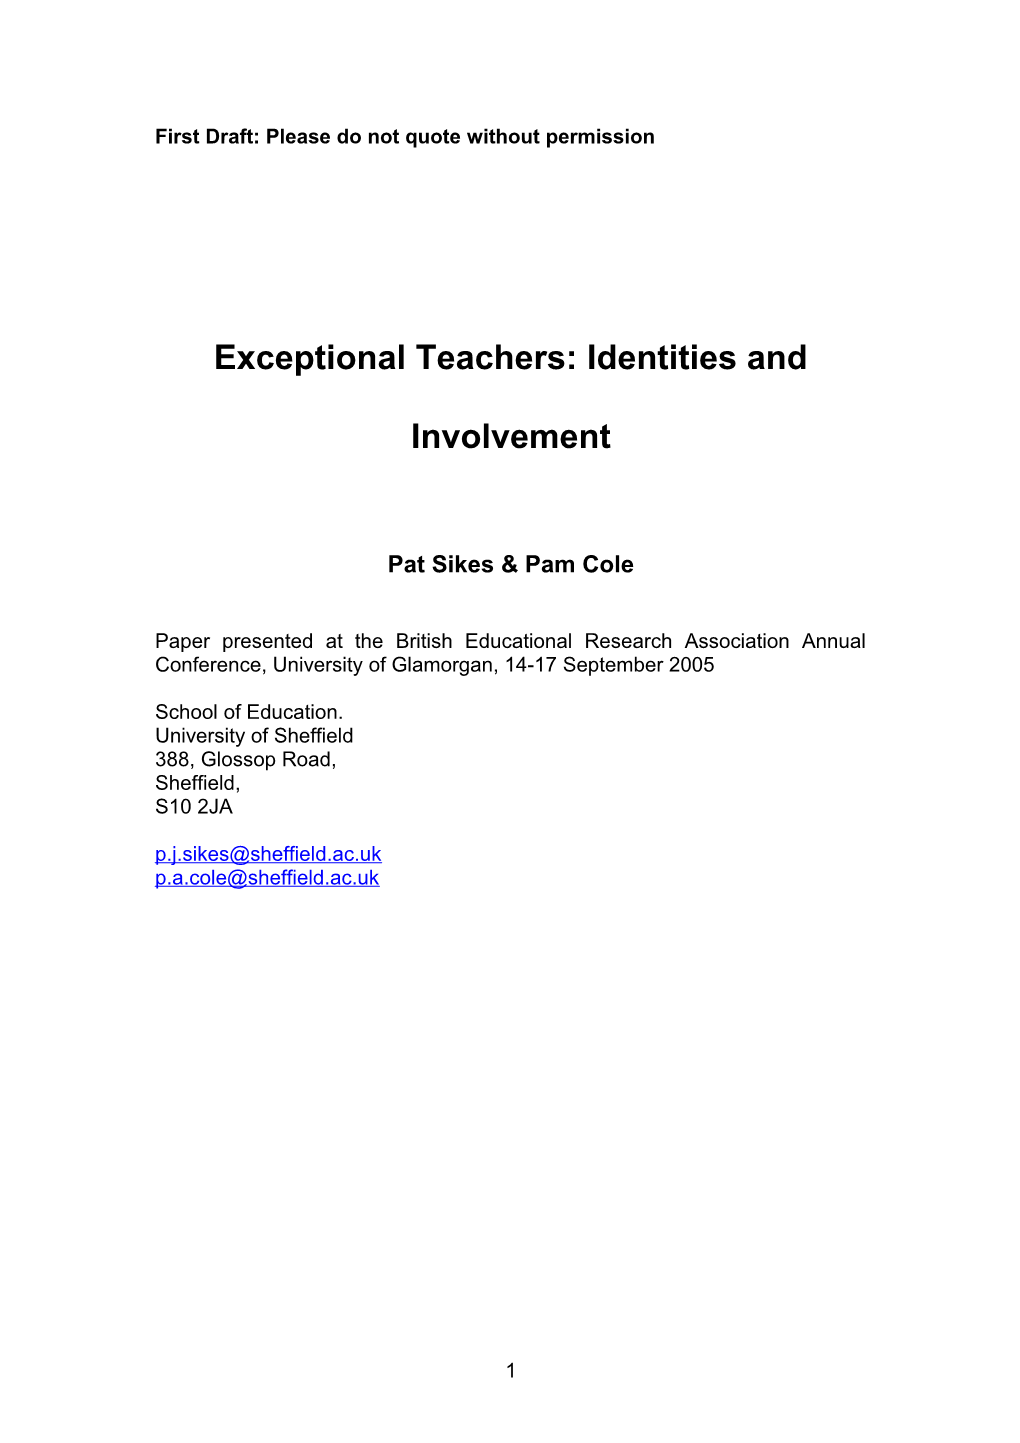 Exceptional Teachers: Identities and Involvement